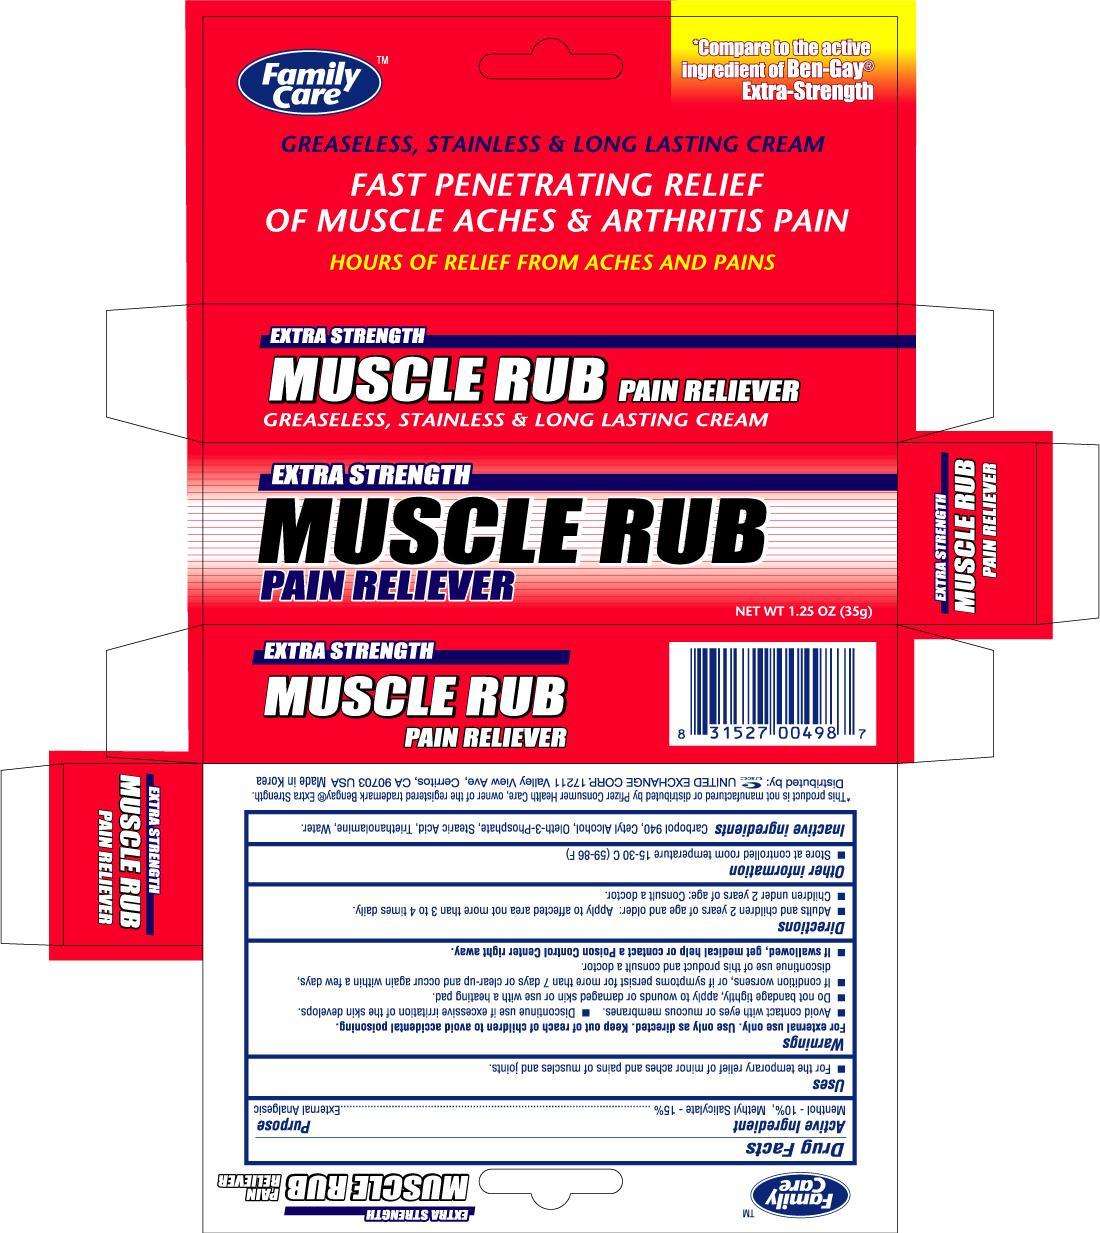 FAMILY CARE MUSCLE RUB PAIN RELIEVER